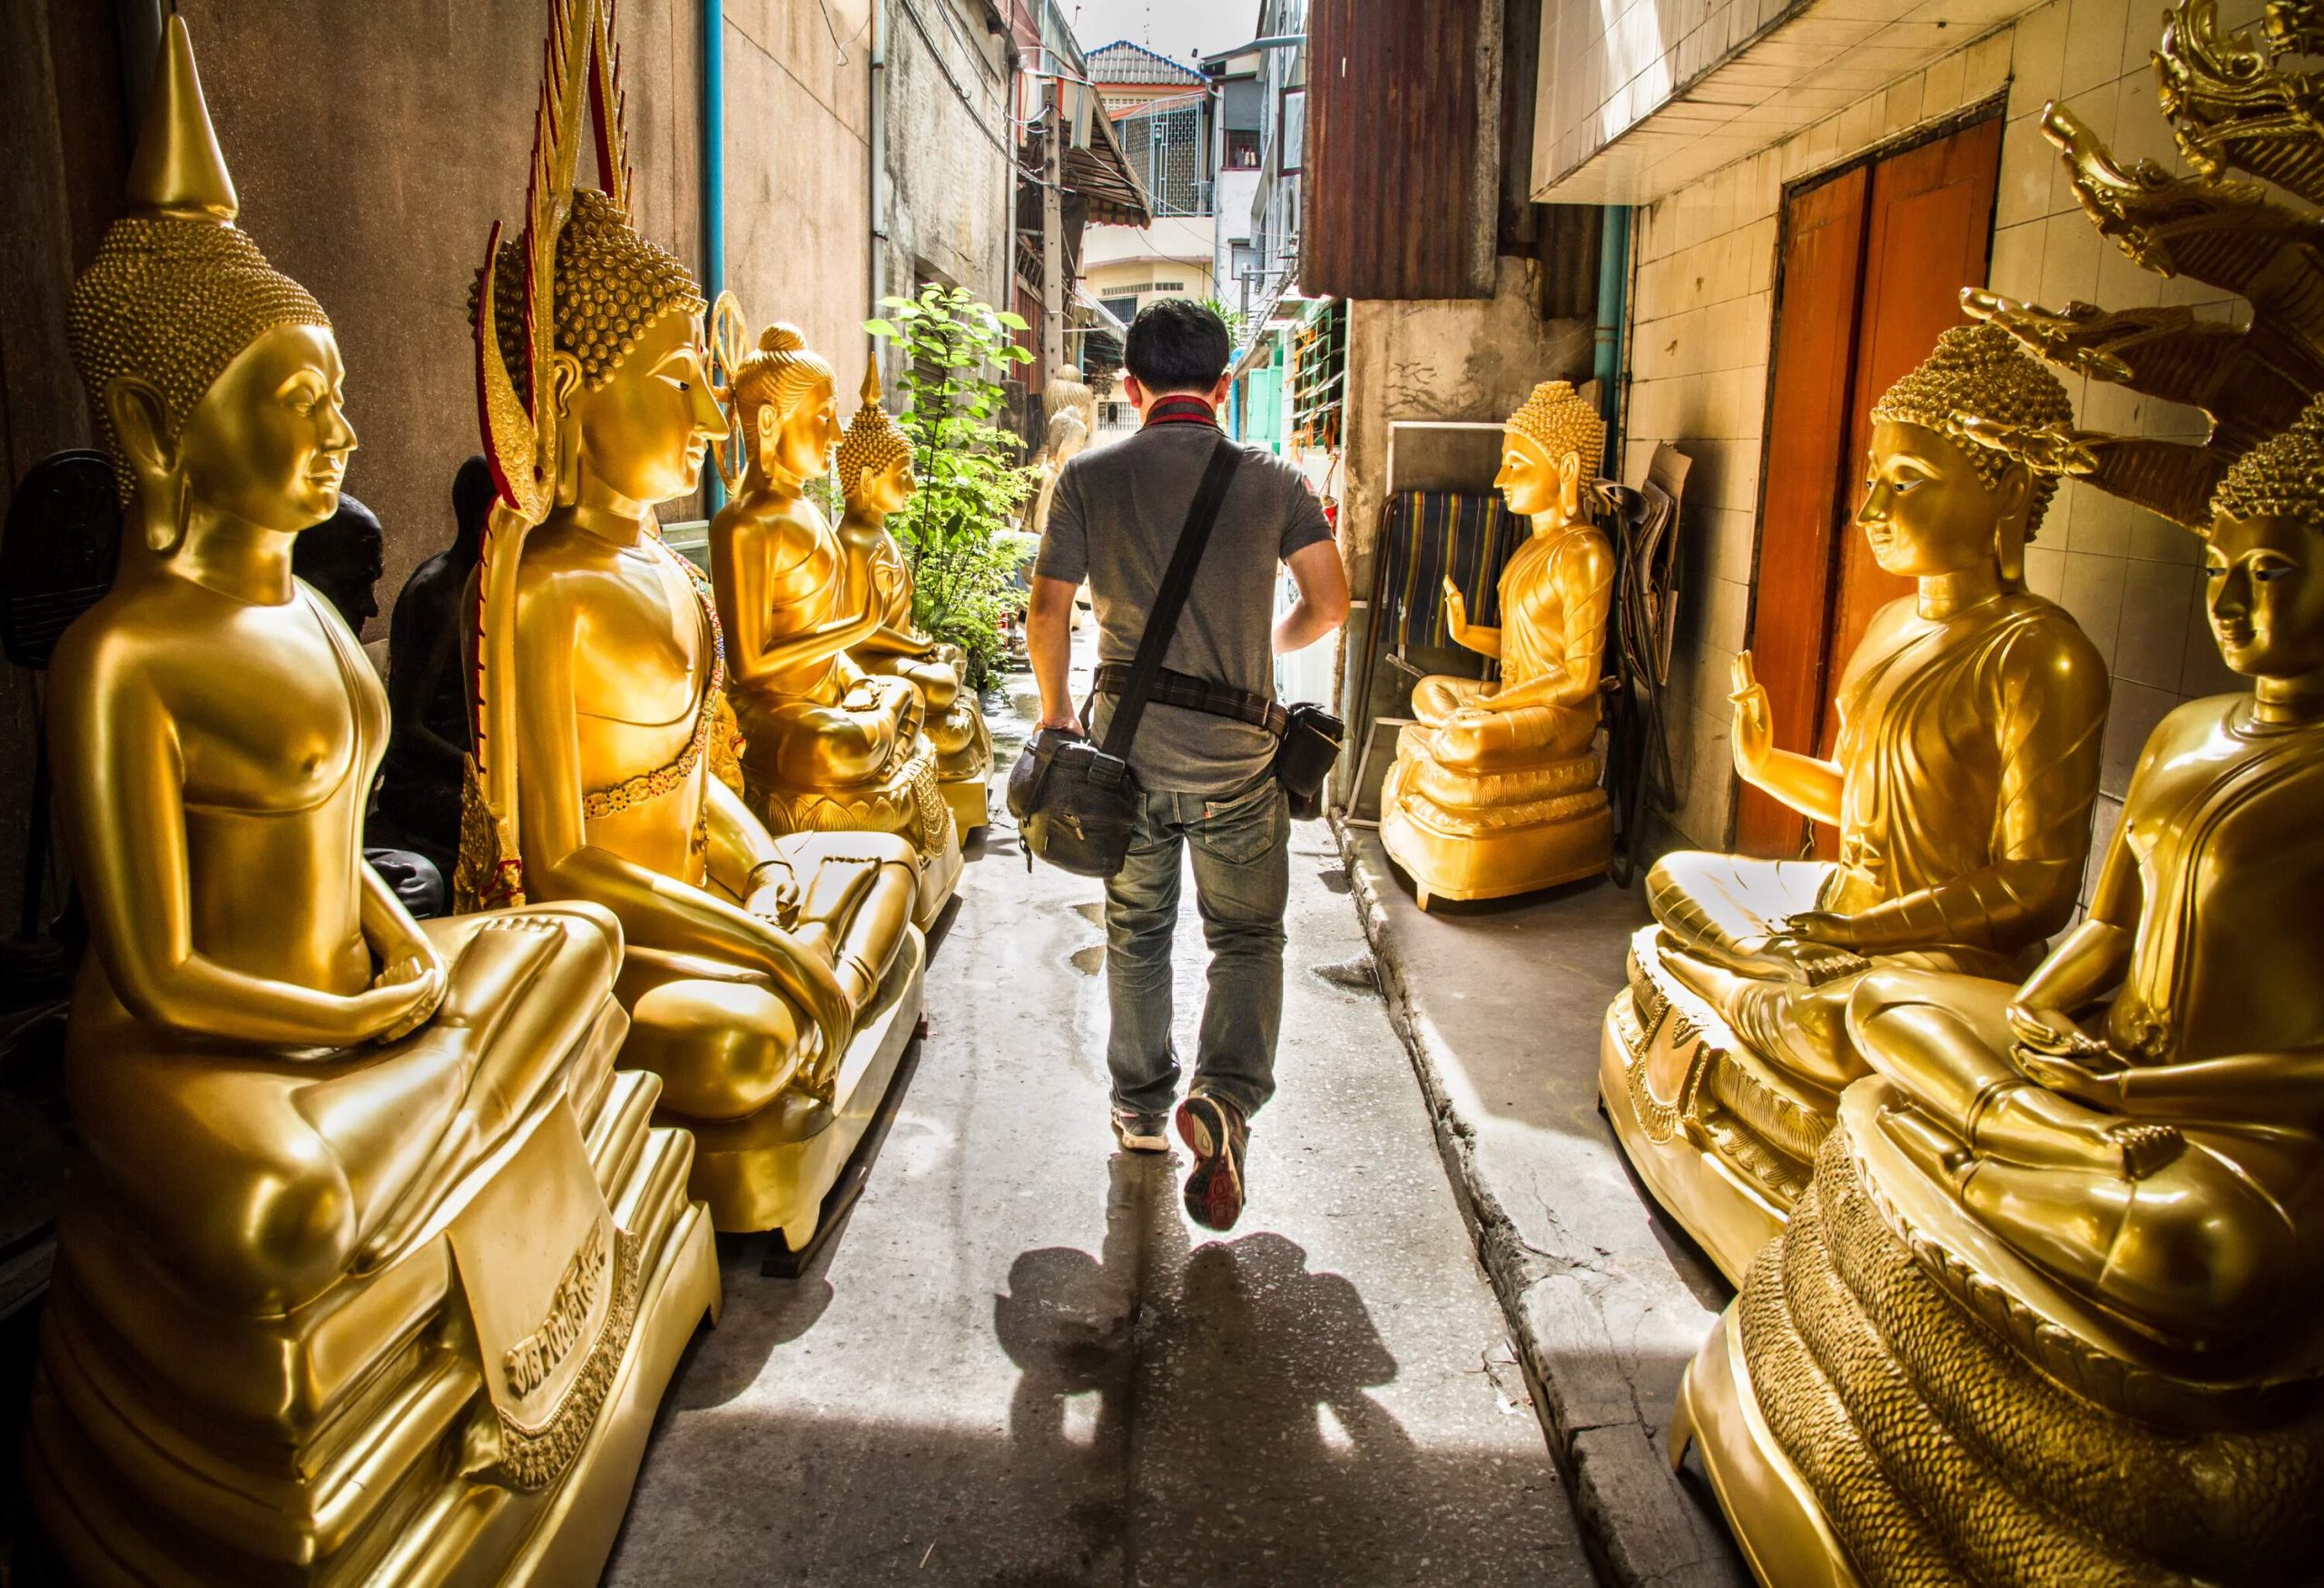 A man carrying a camera walks on a narrow street with golden Buddha statues flanked on both sides.